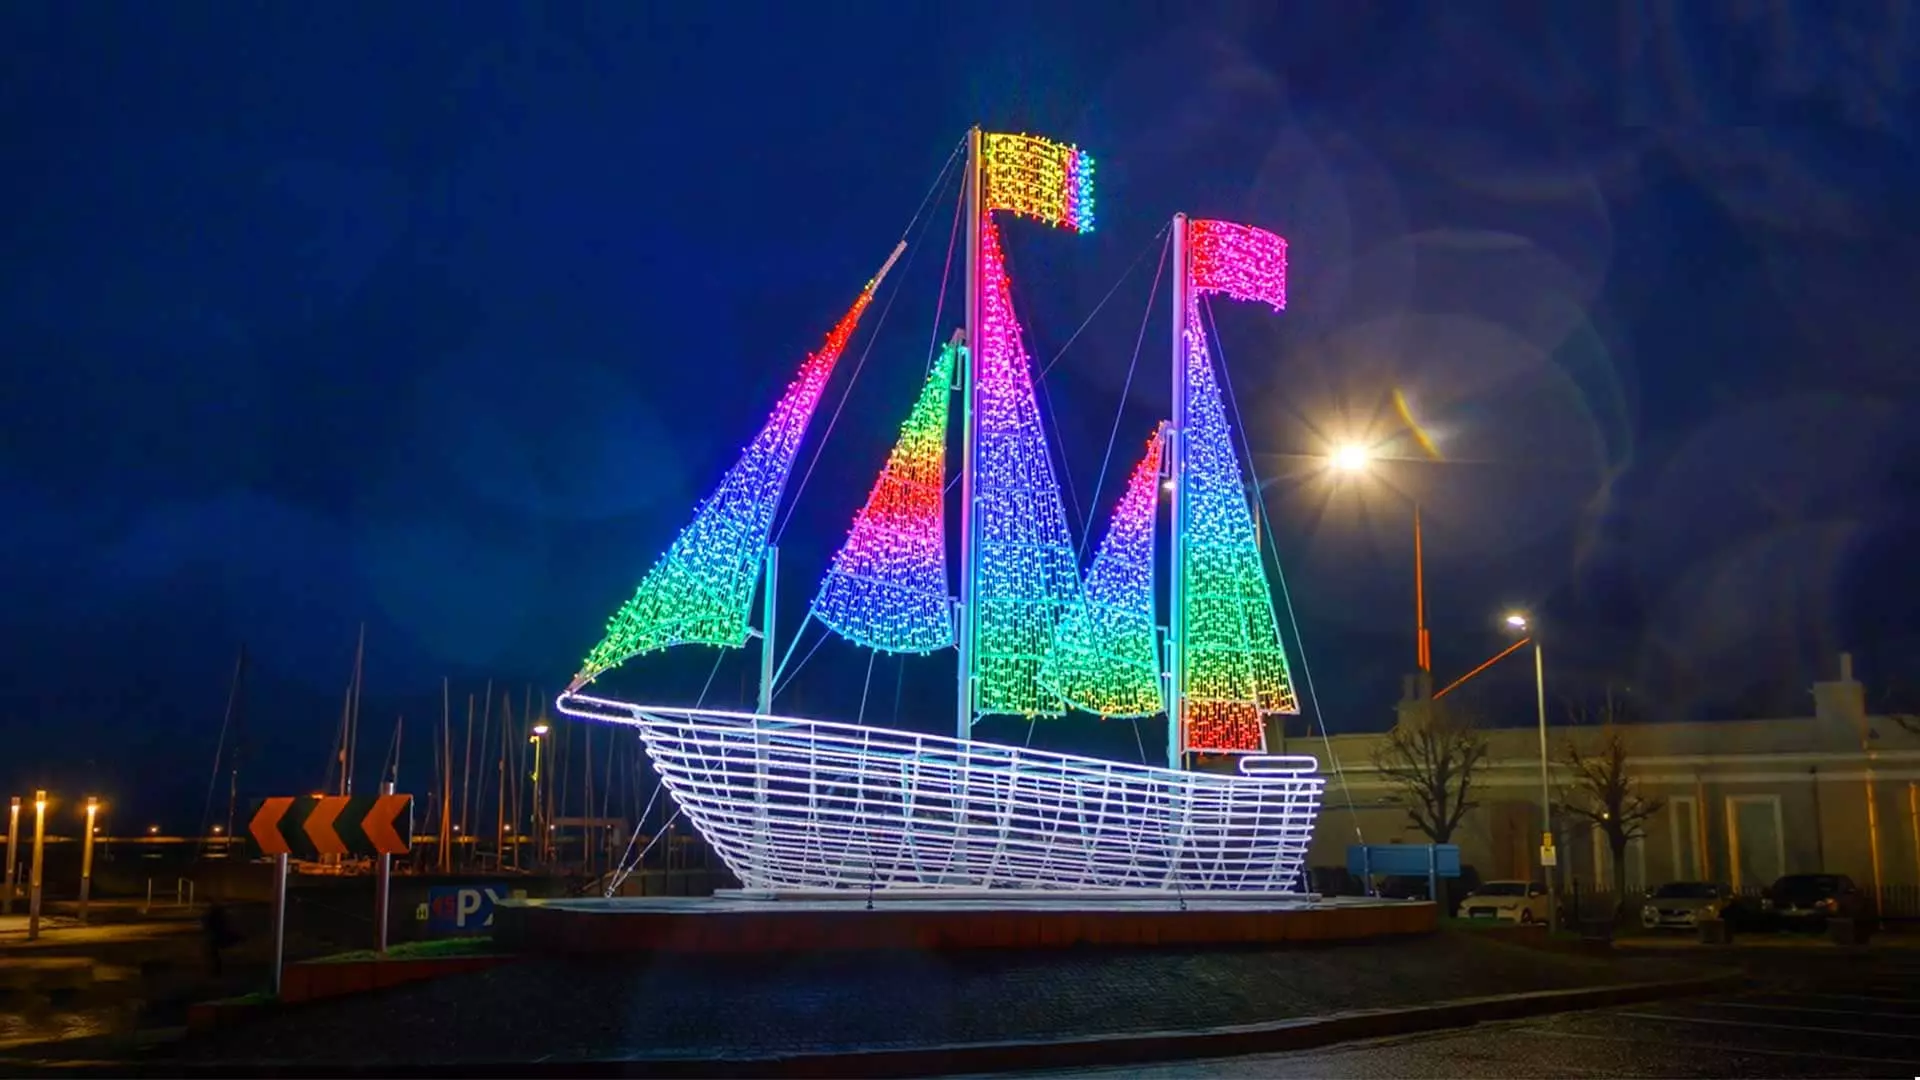 Twinkly Pro Dun Laoghaire Ship Harbour Commercial Christmas Lighting